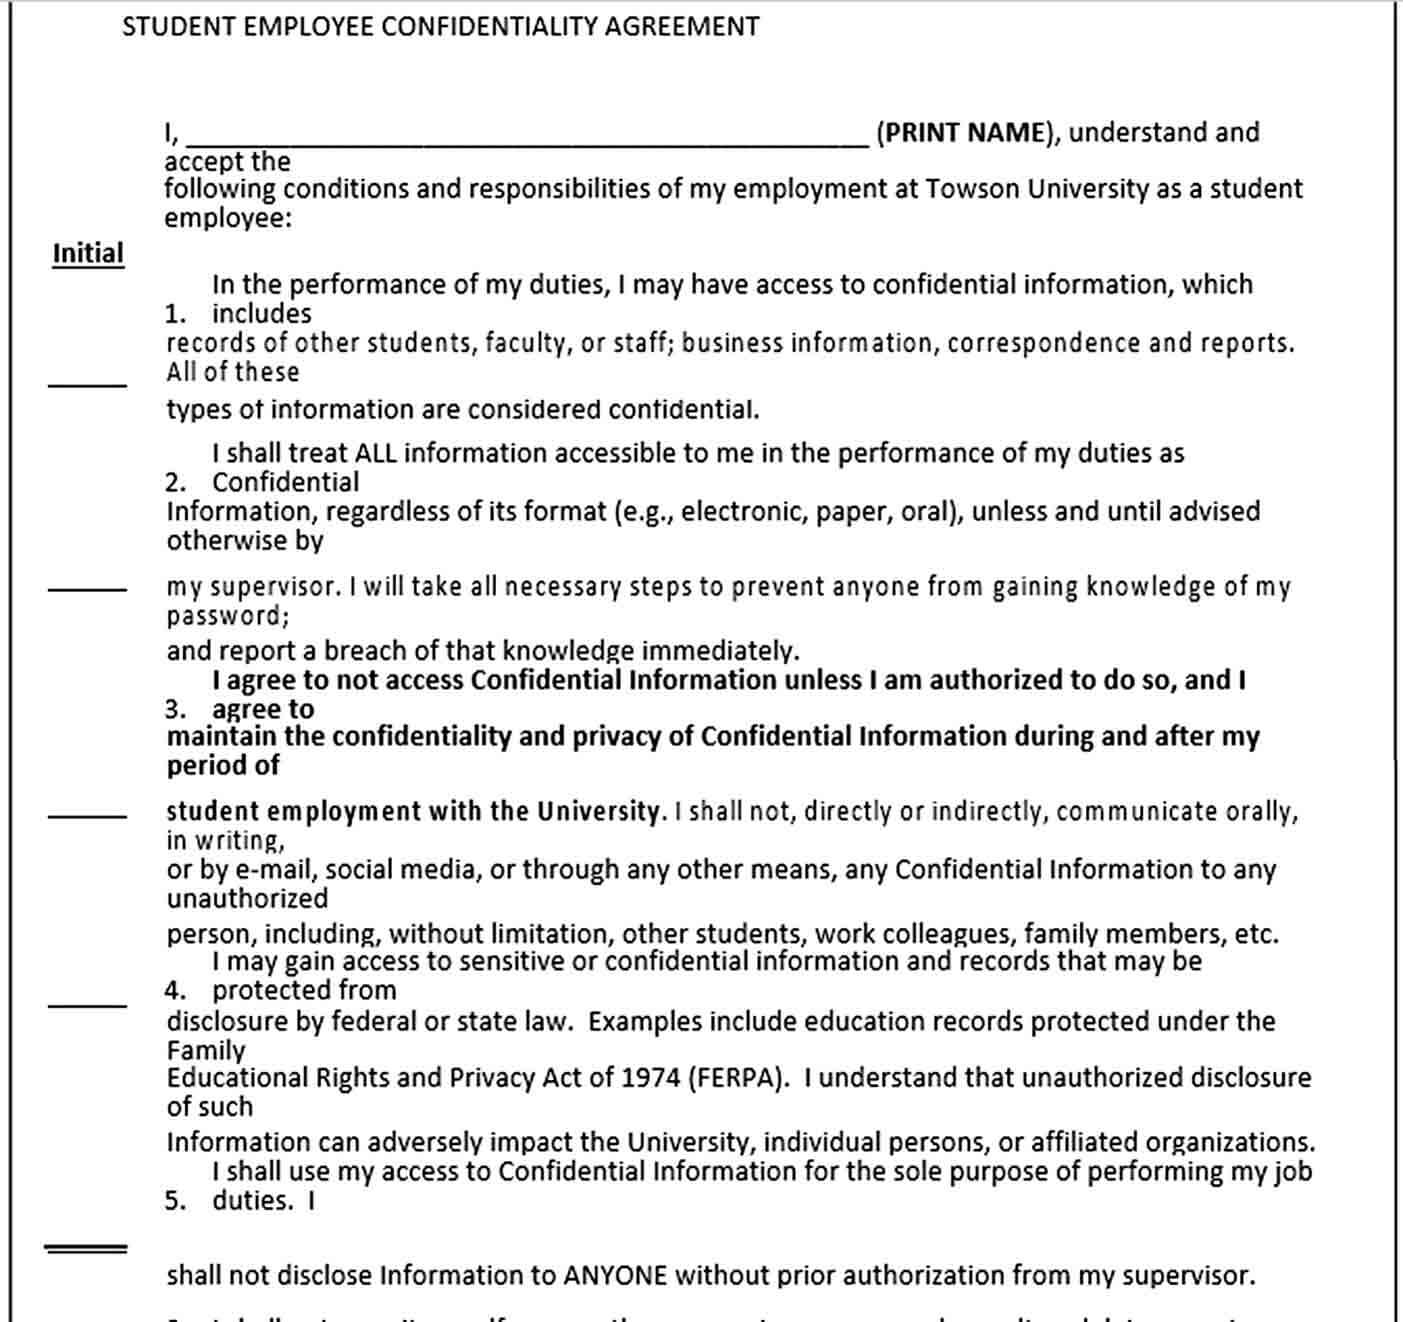 Sample Student Employment Confidentiality Agreement